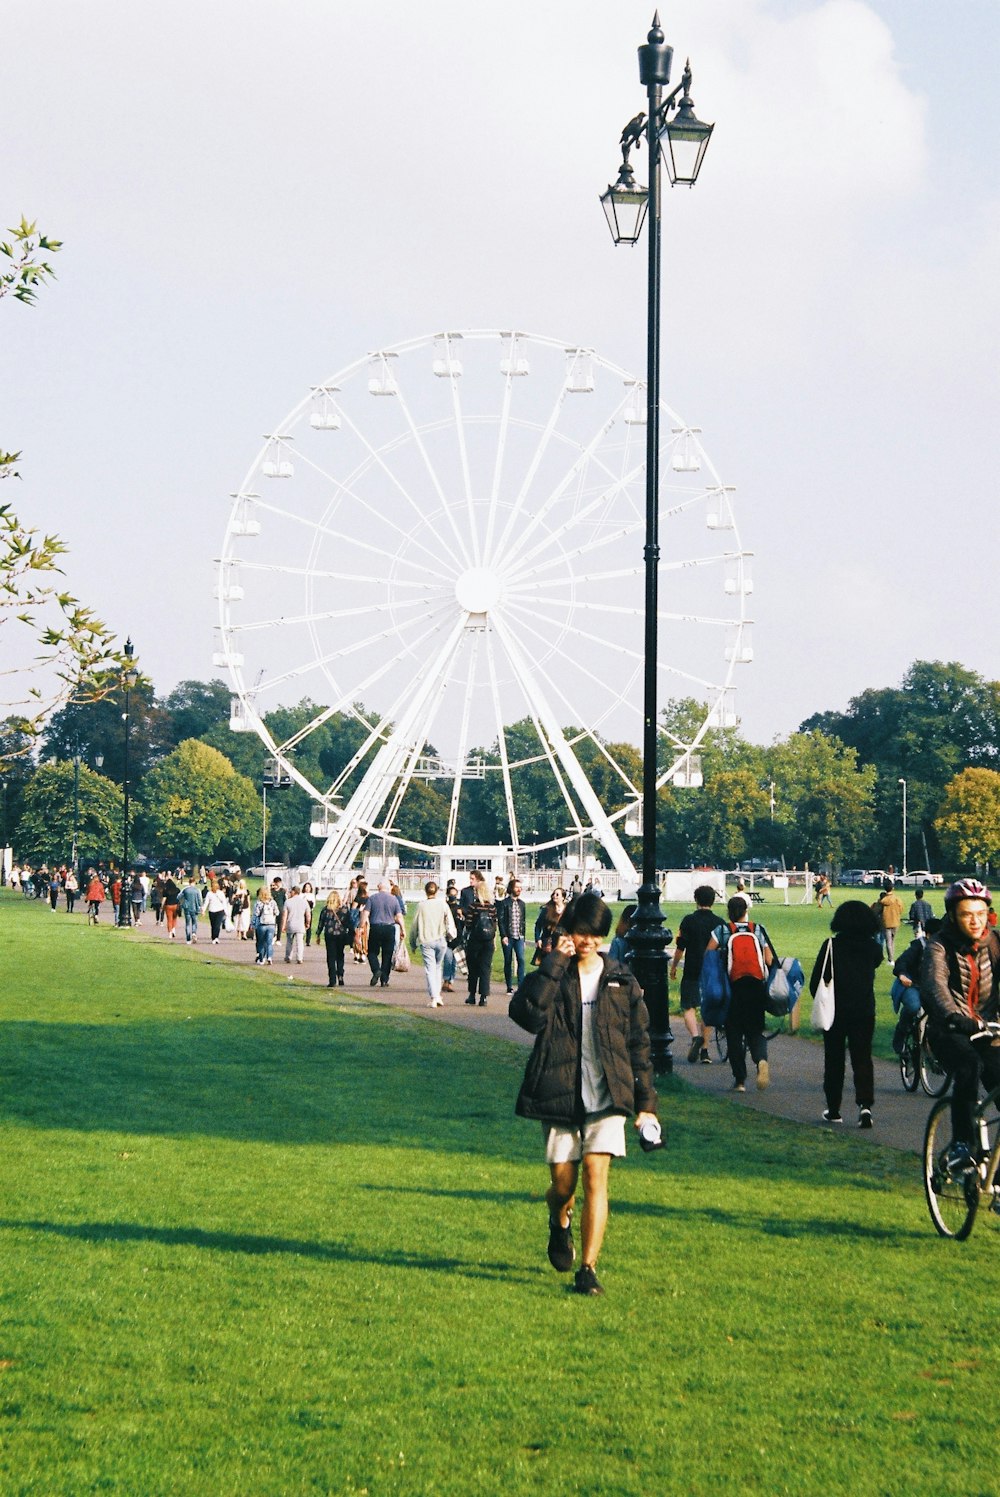 a crowd of people walking around a park next to a ferris wheel